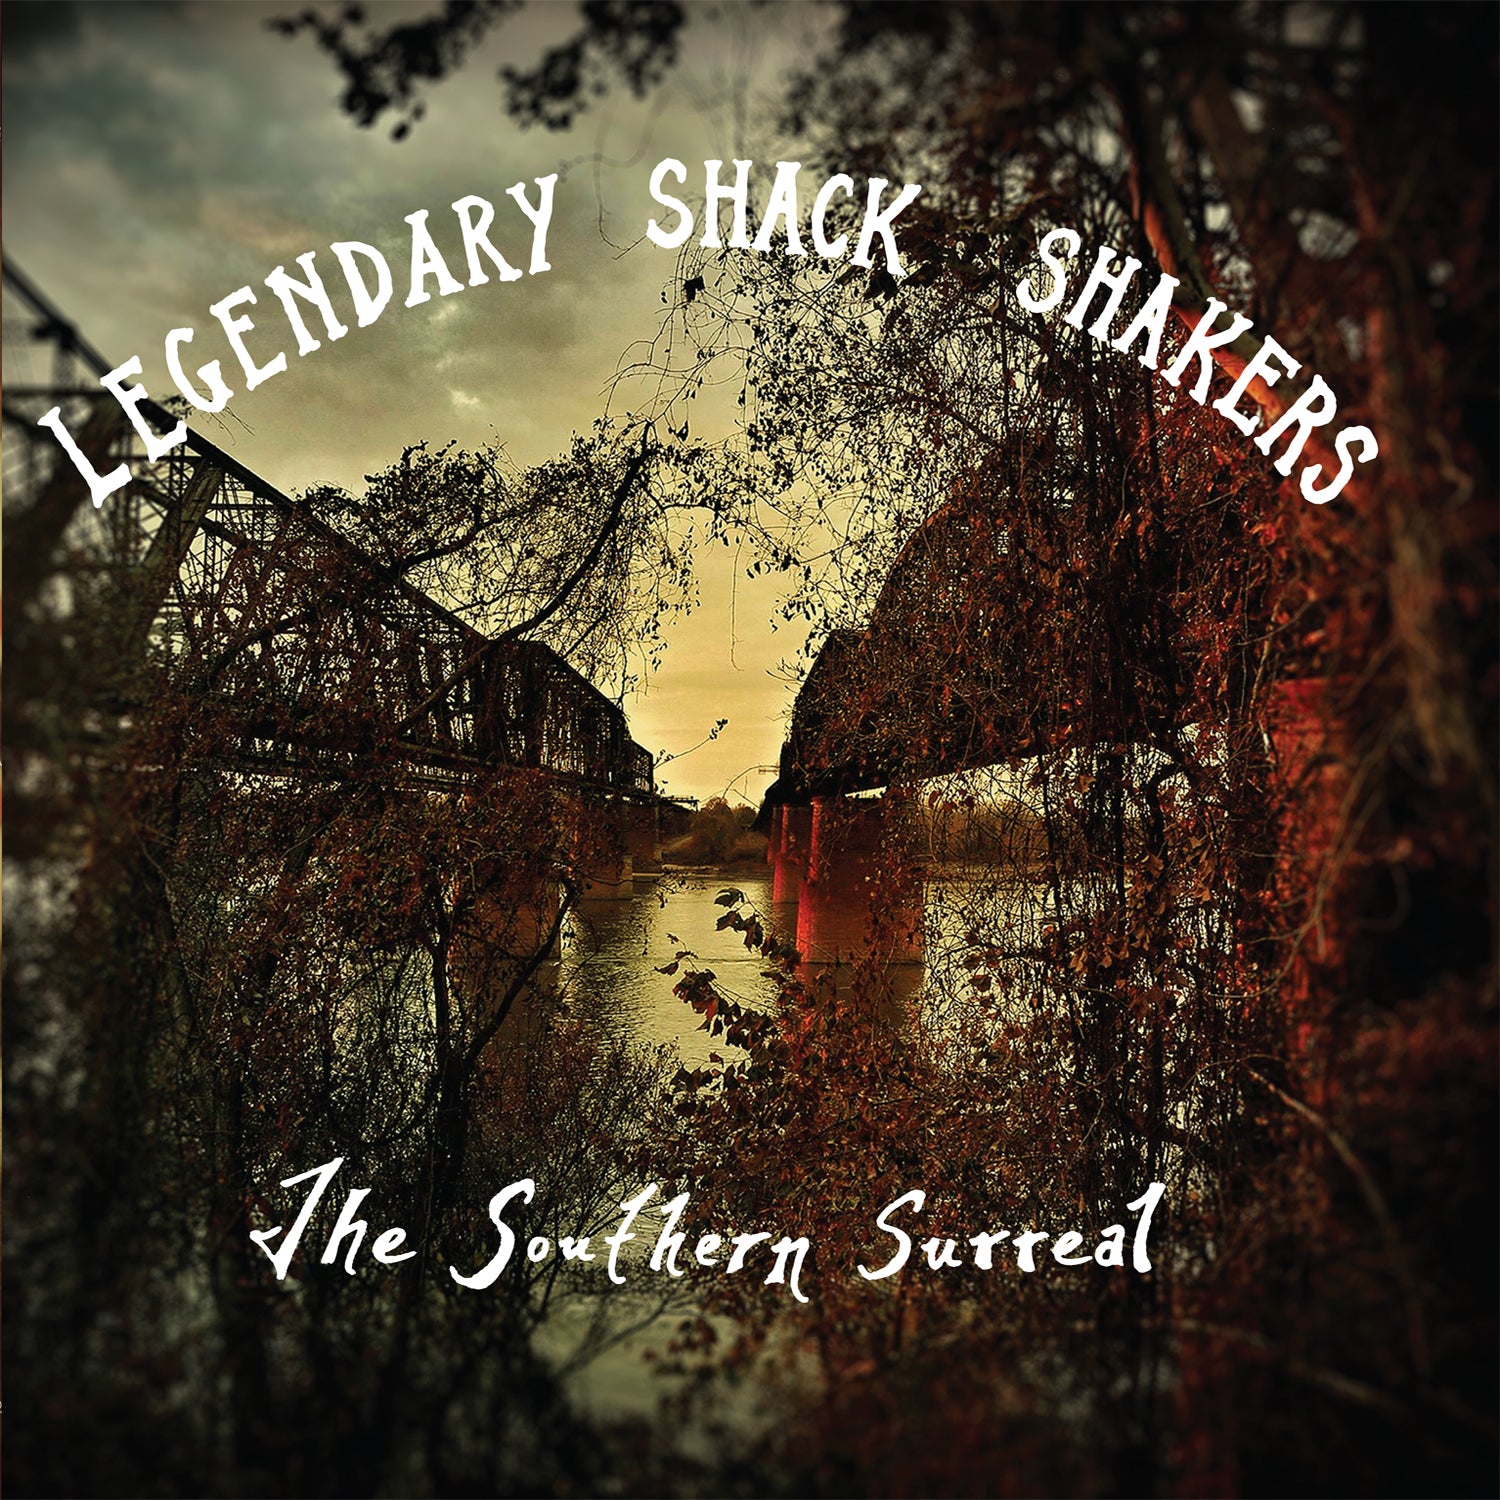 v476 - Legendary Shack Shakers - "The Southern Surreal"